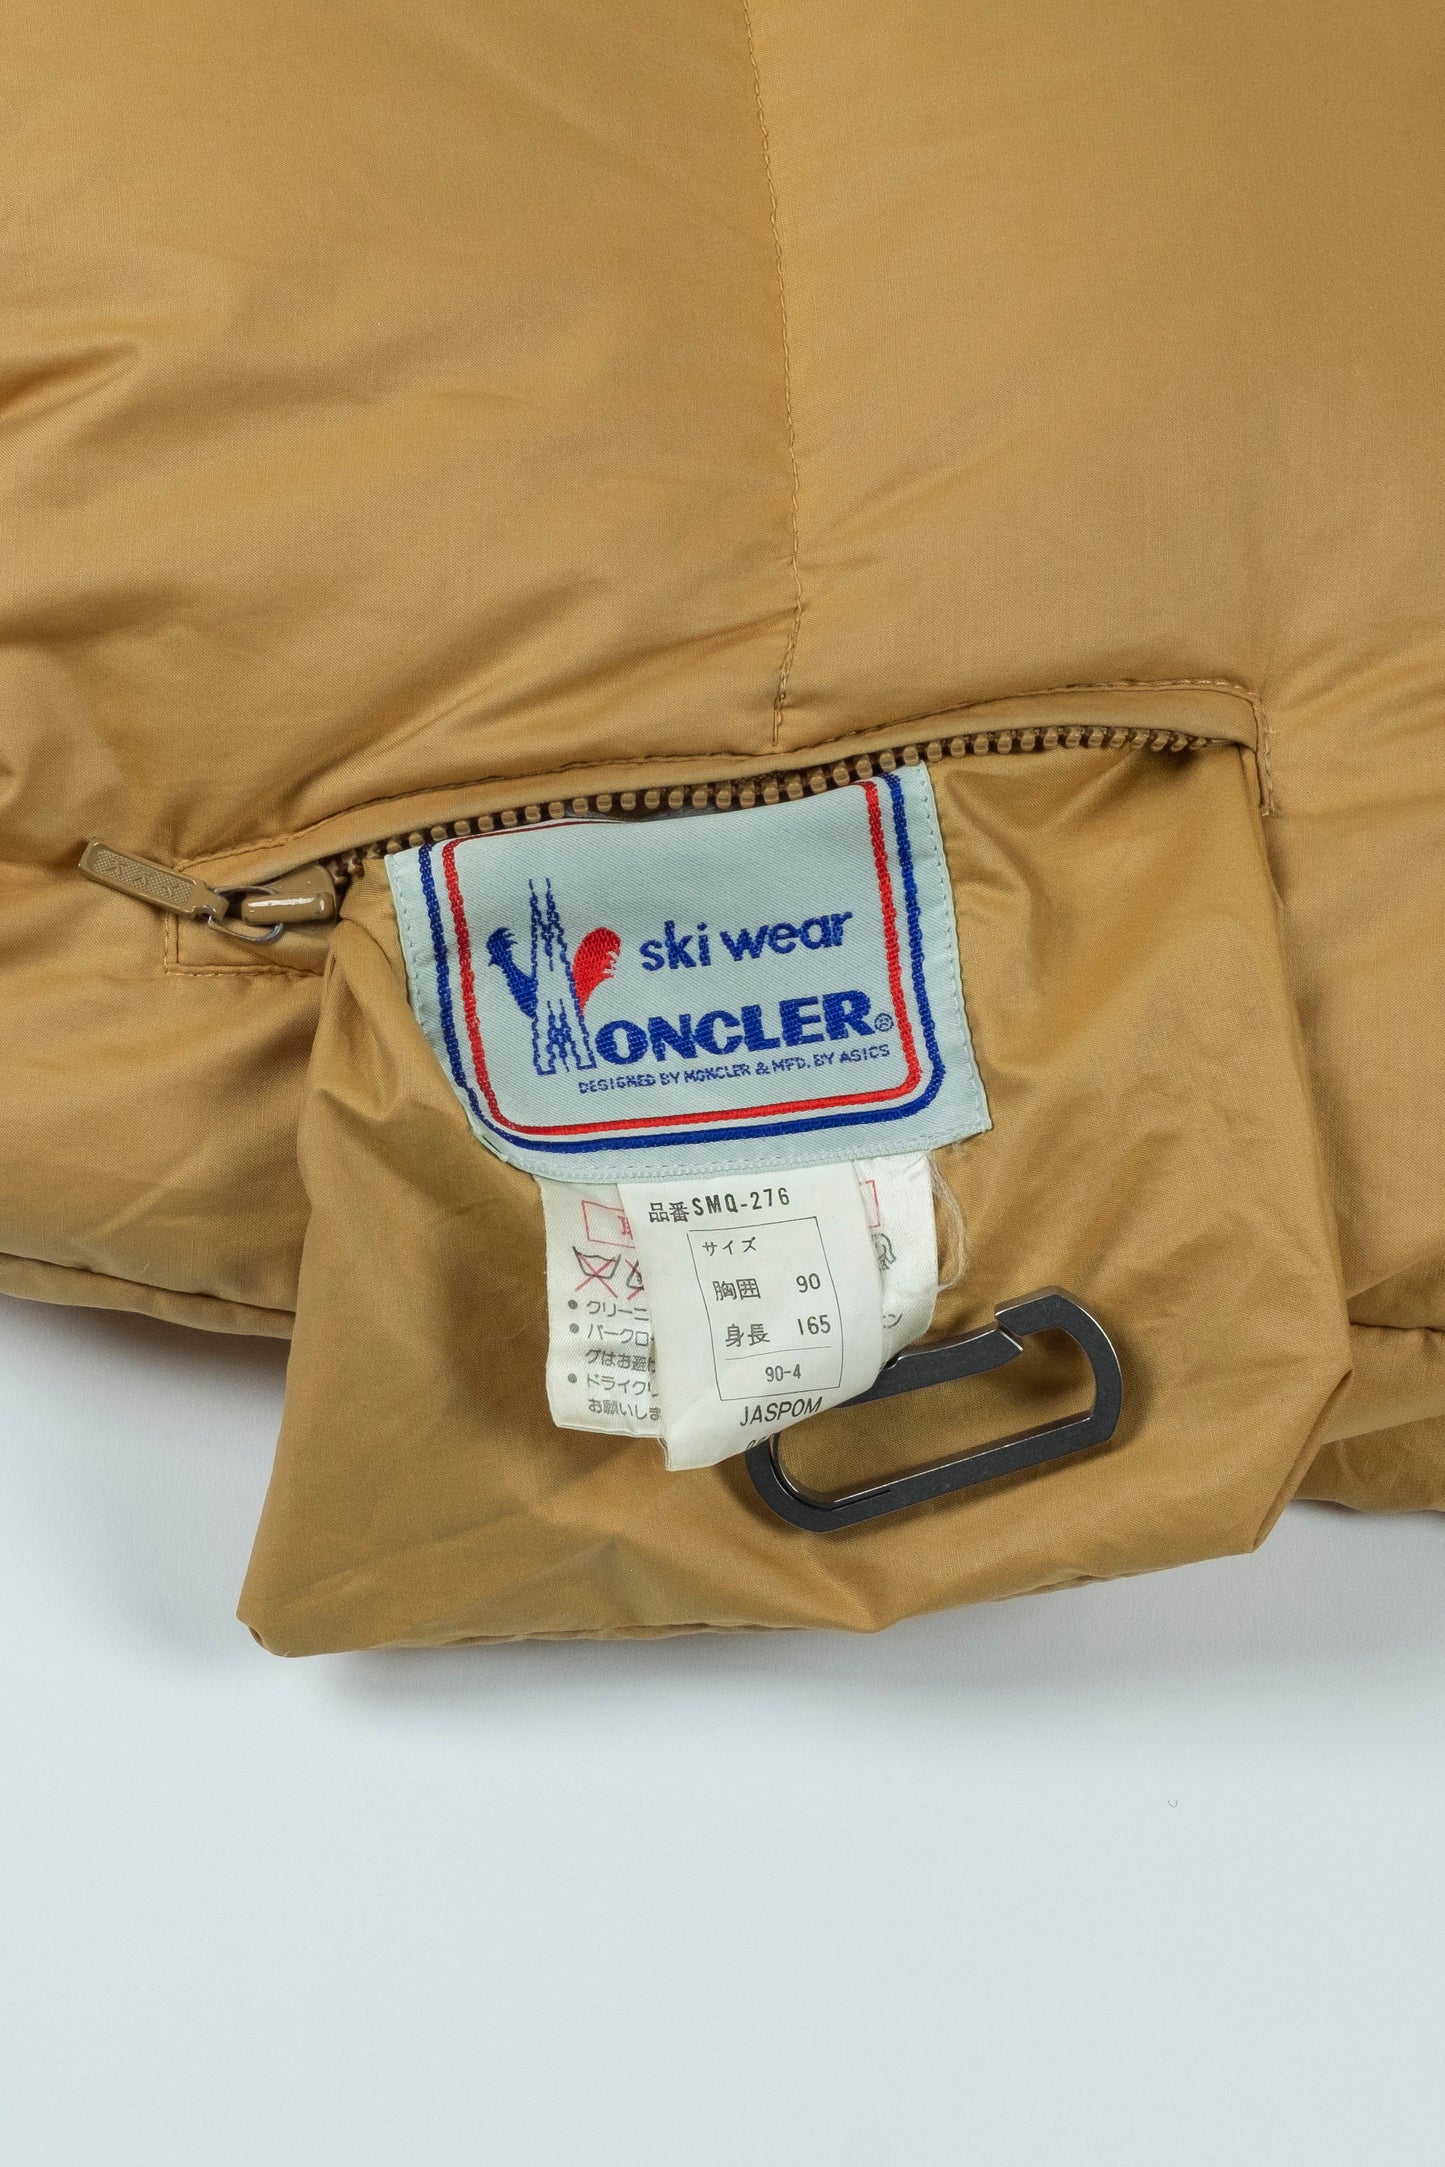 Moncler Beige/Check Reversible Puffer Jacket